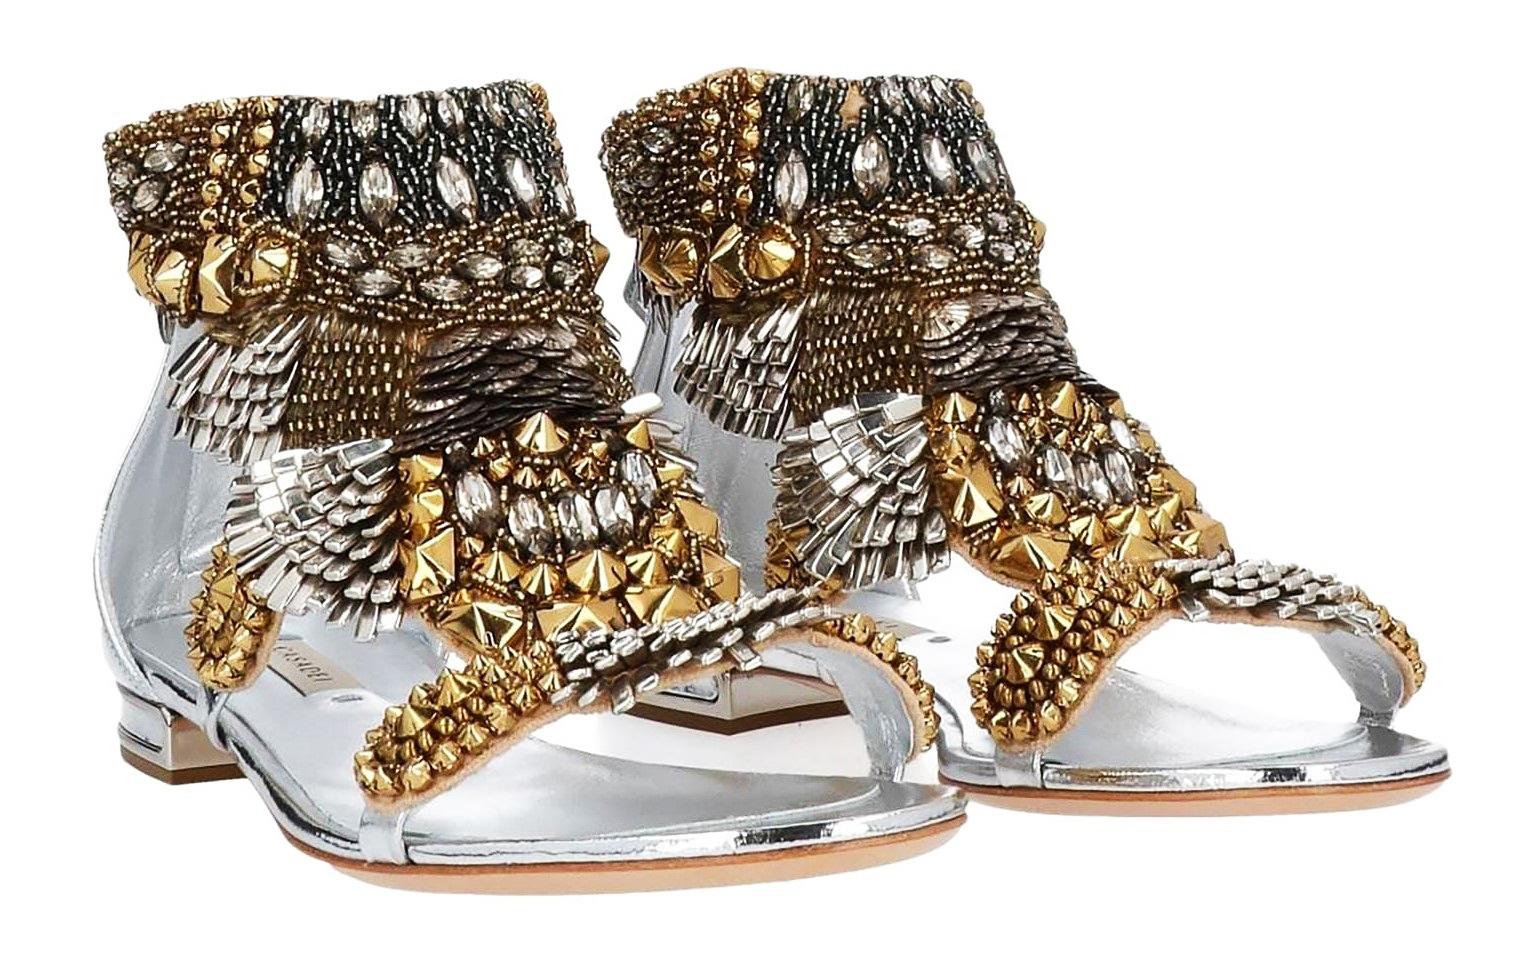 NWT Casadei Leather Fully Embellished Flat Sandals
Italian size 36 - US 6
Silver Tone Patent Leather, Gold and Silver Tone Studs and Beads, Smoky Gray Crystals, Back Zip Closure, Leather Sole, Insole and Lining.
Heel Height - 0.5 inches
Made in